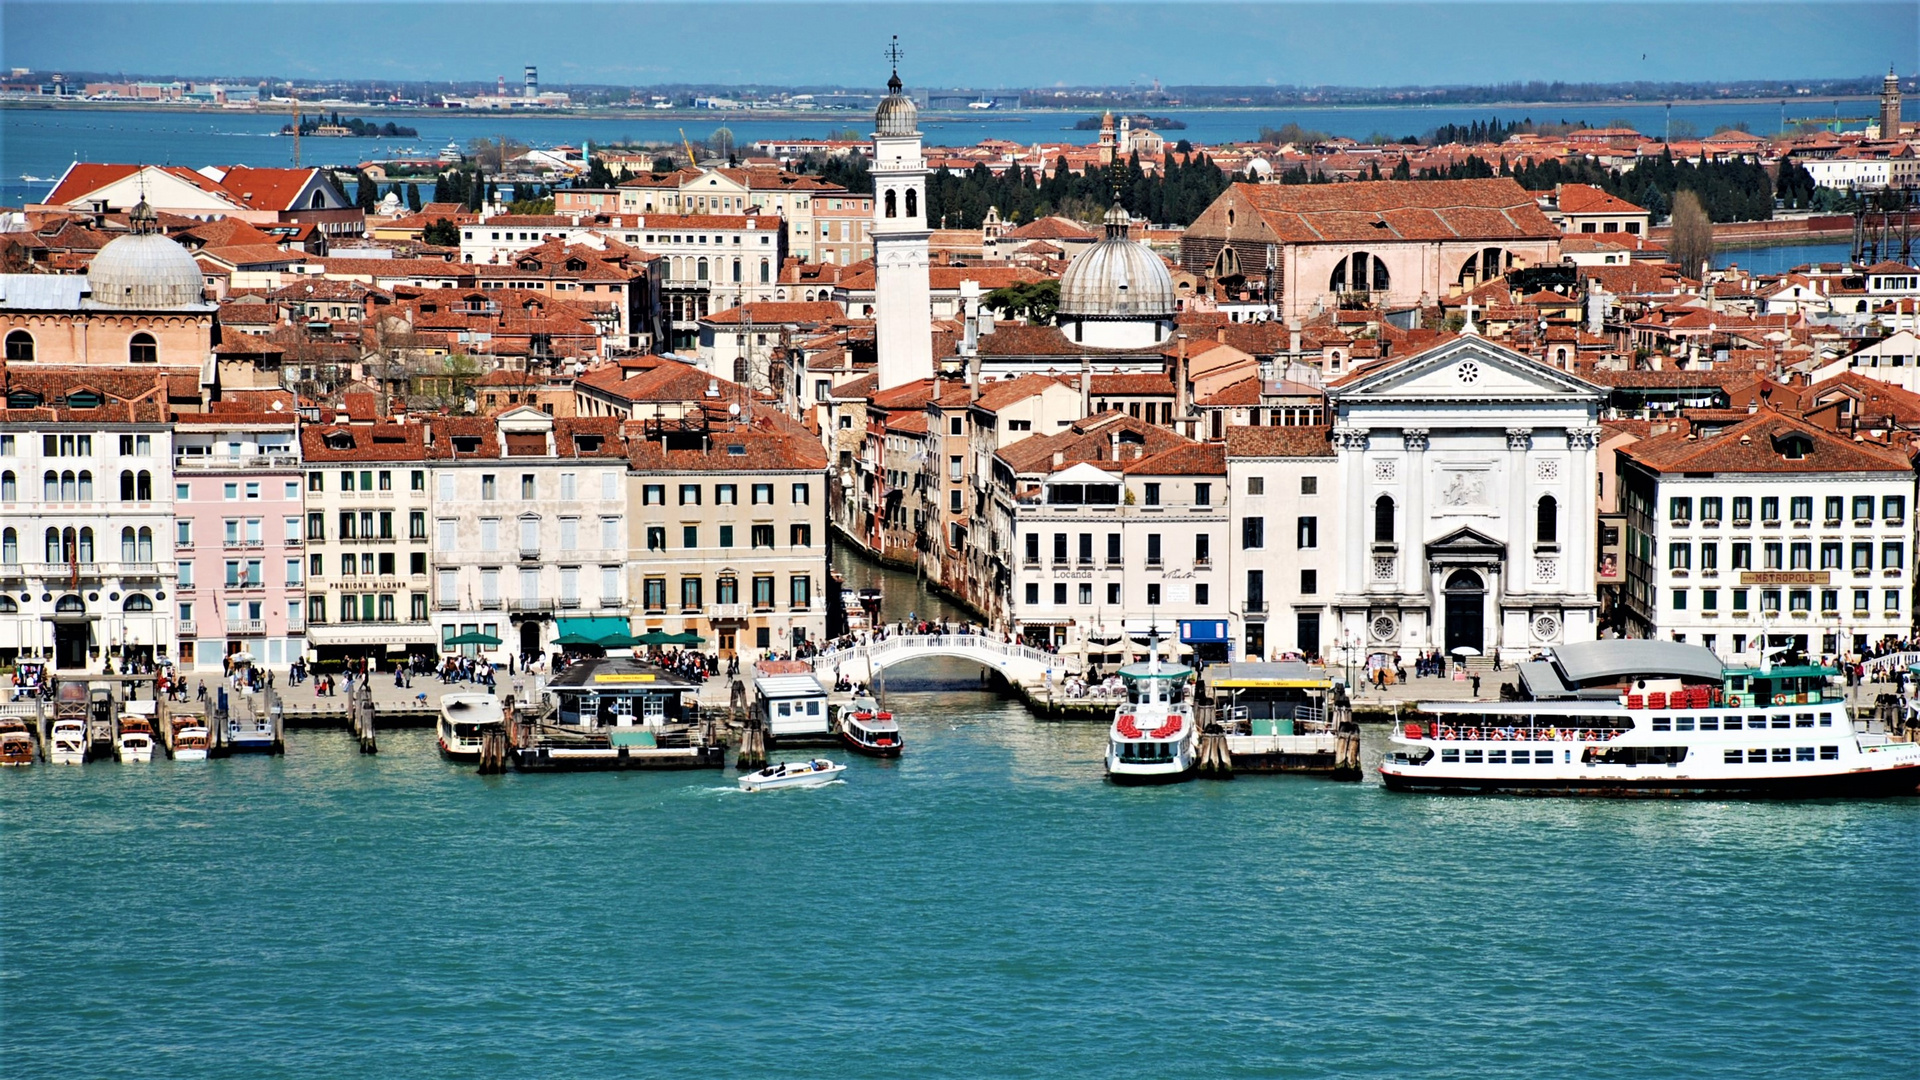 View of Venice 3.0